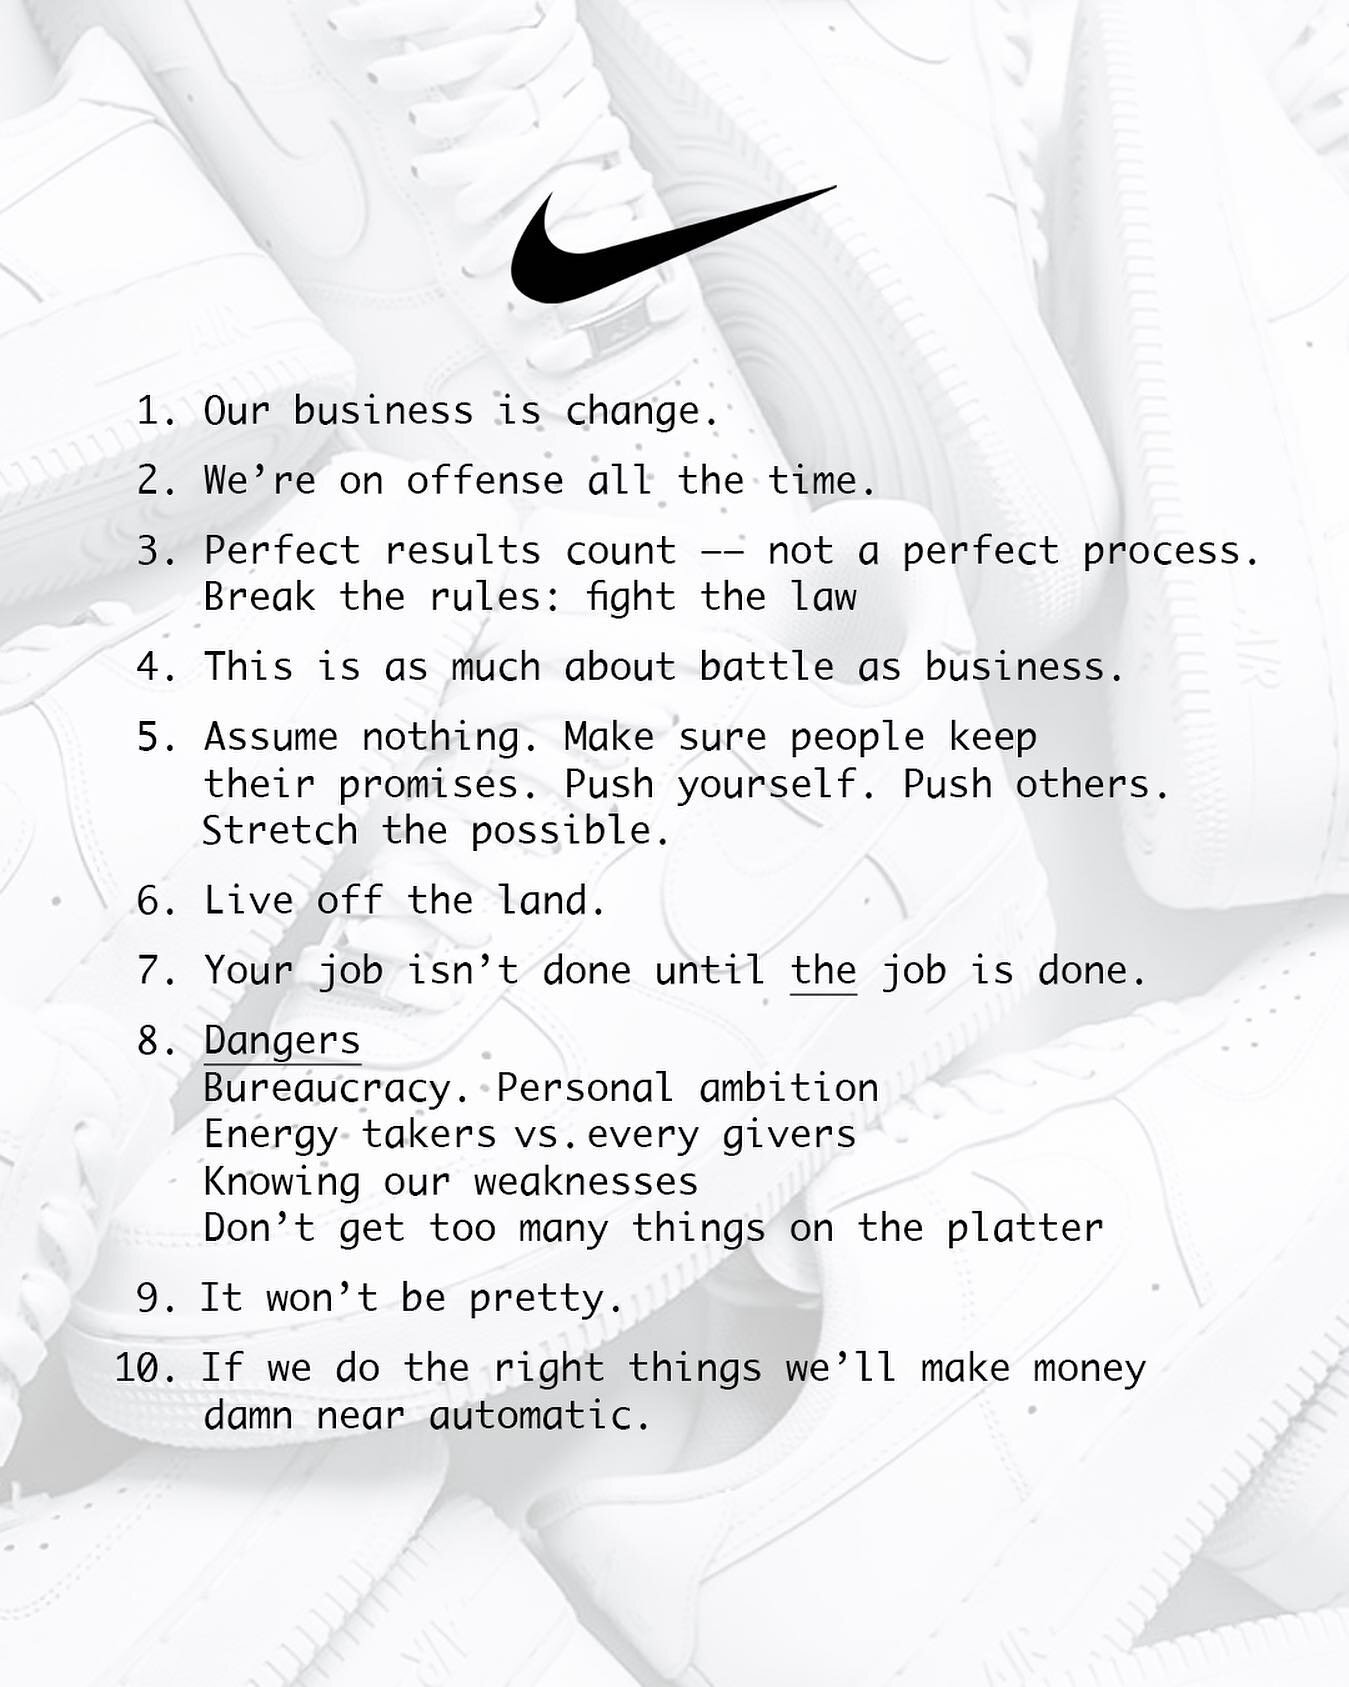 @nike&rsquo;s 10 principles from the 1970s that @jeffbezos took to heart 👟 

Business is change. Meaning, all business is change. Life is change. What worked for you may not work for you now. 

We&rsquo;re on offense. All the time&hellip;because def